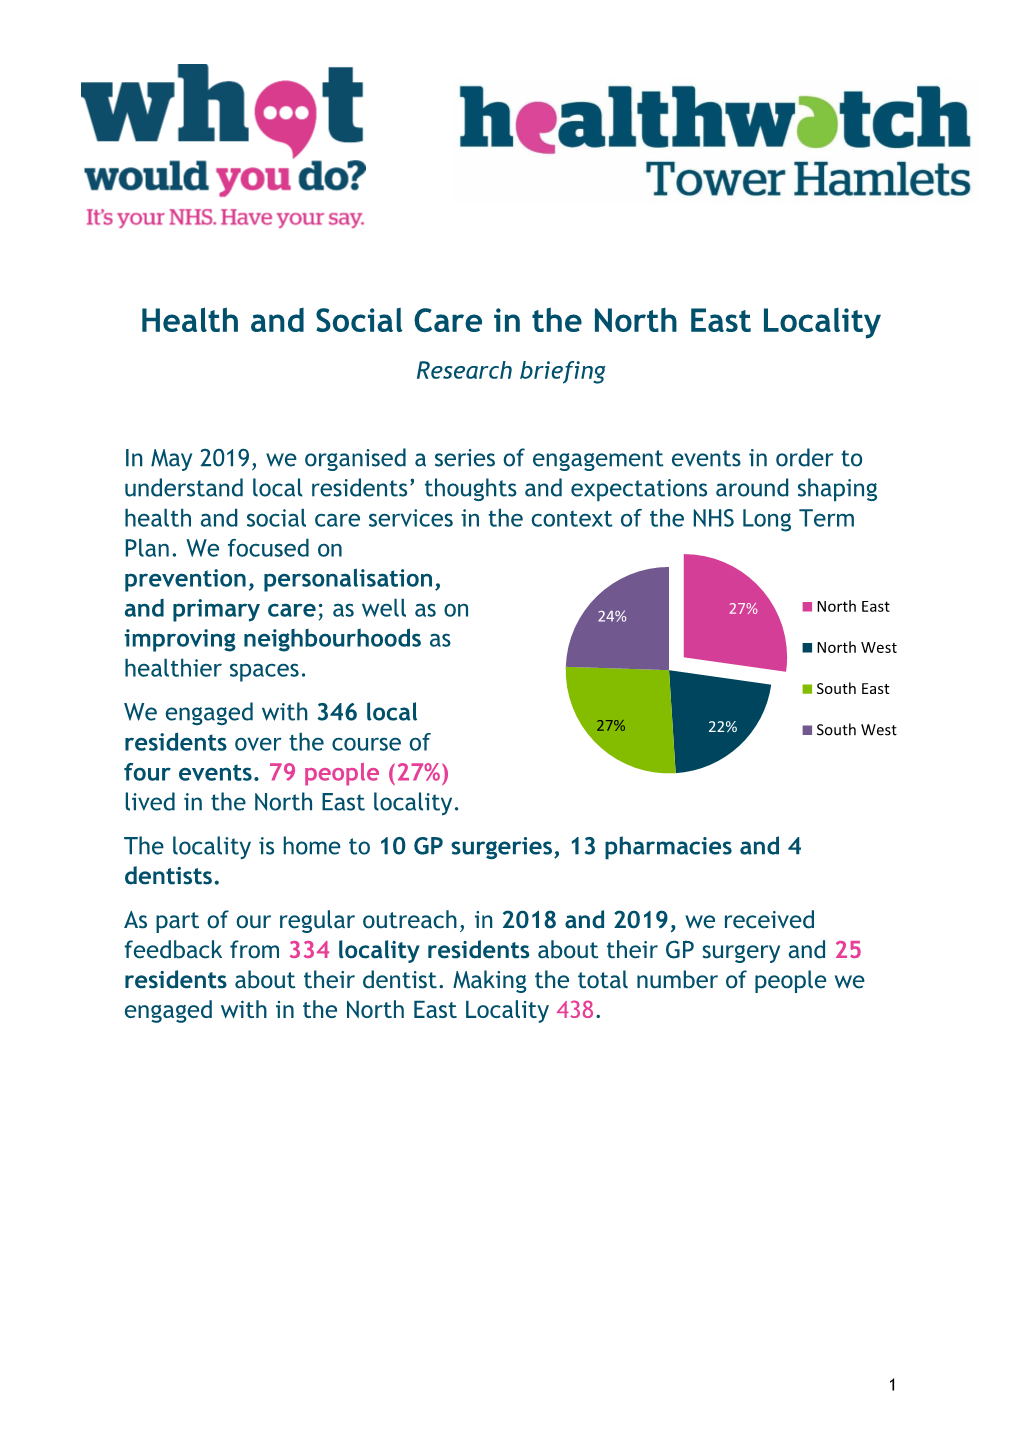 Health and Social Care in the North East Locality Research Briefing